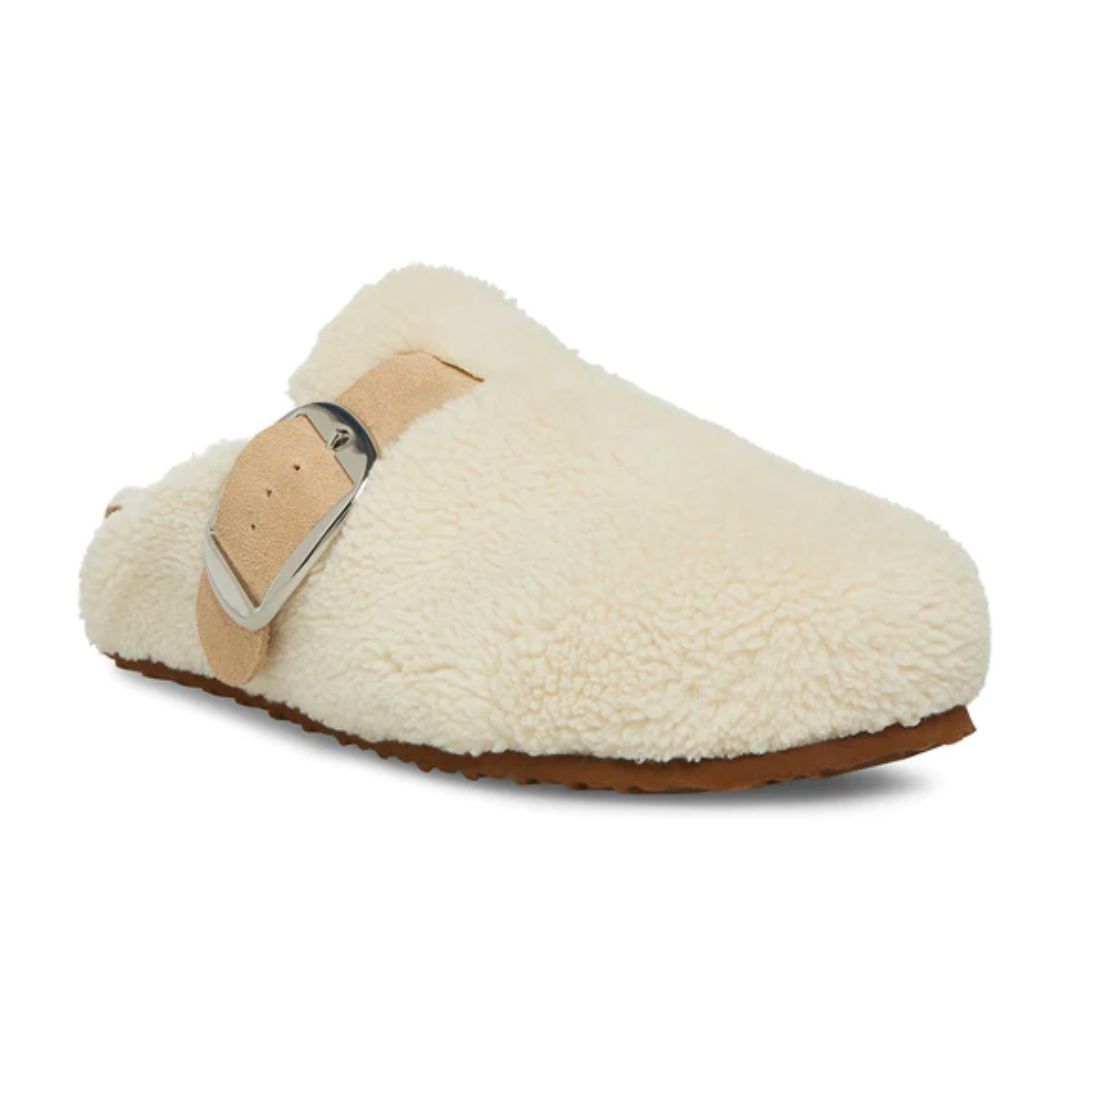 Steve Madden Cuddle Slippers in White | Island Women's Clothing Boutique